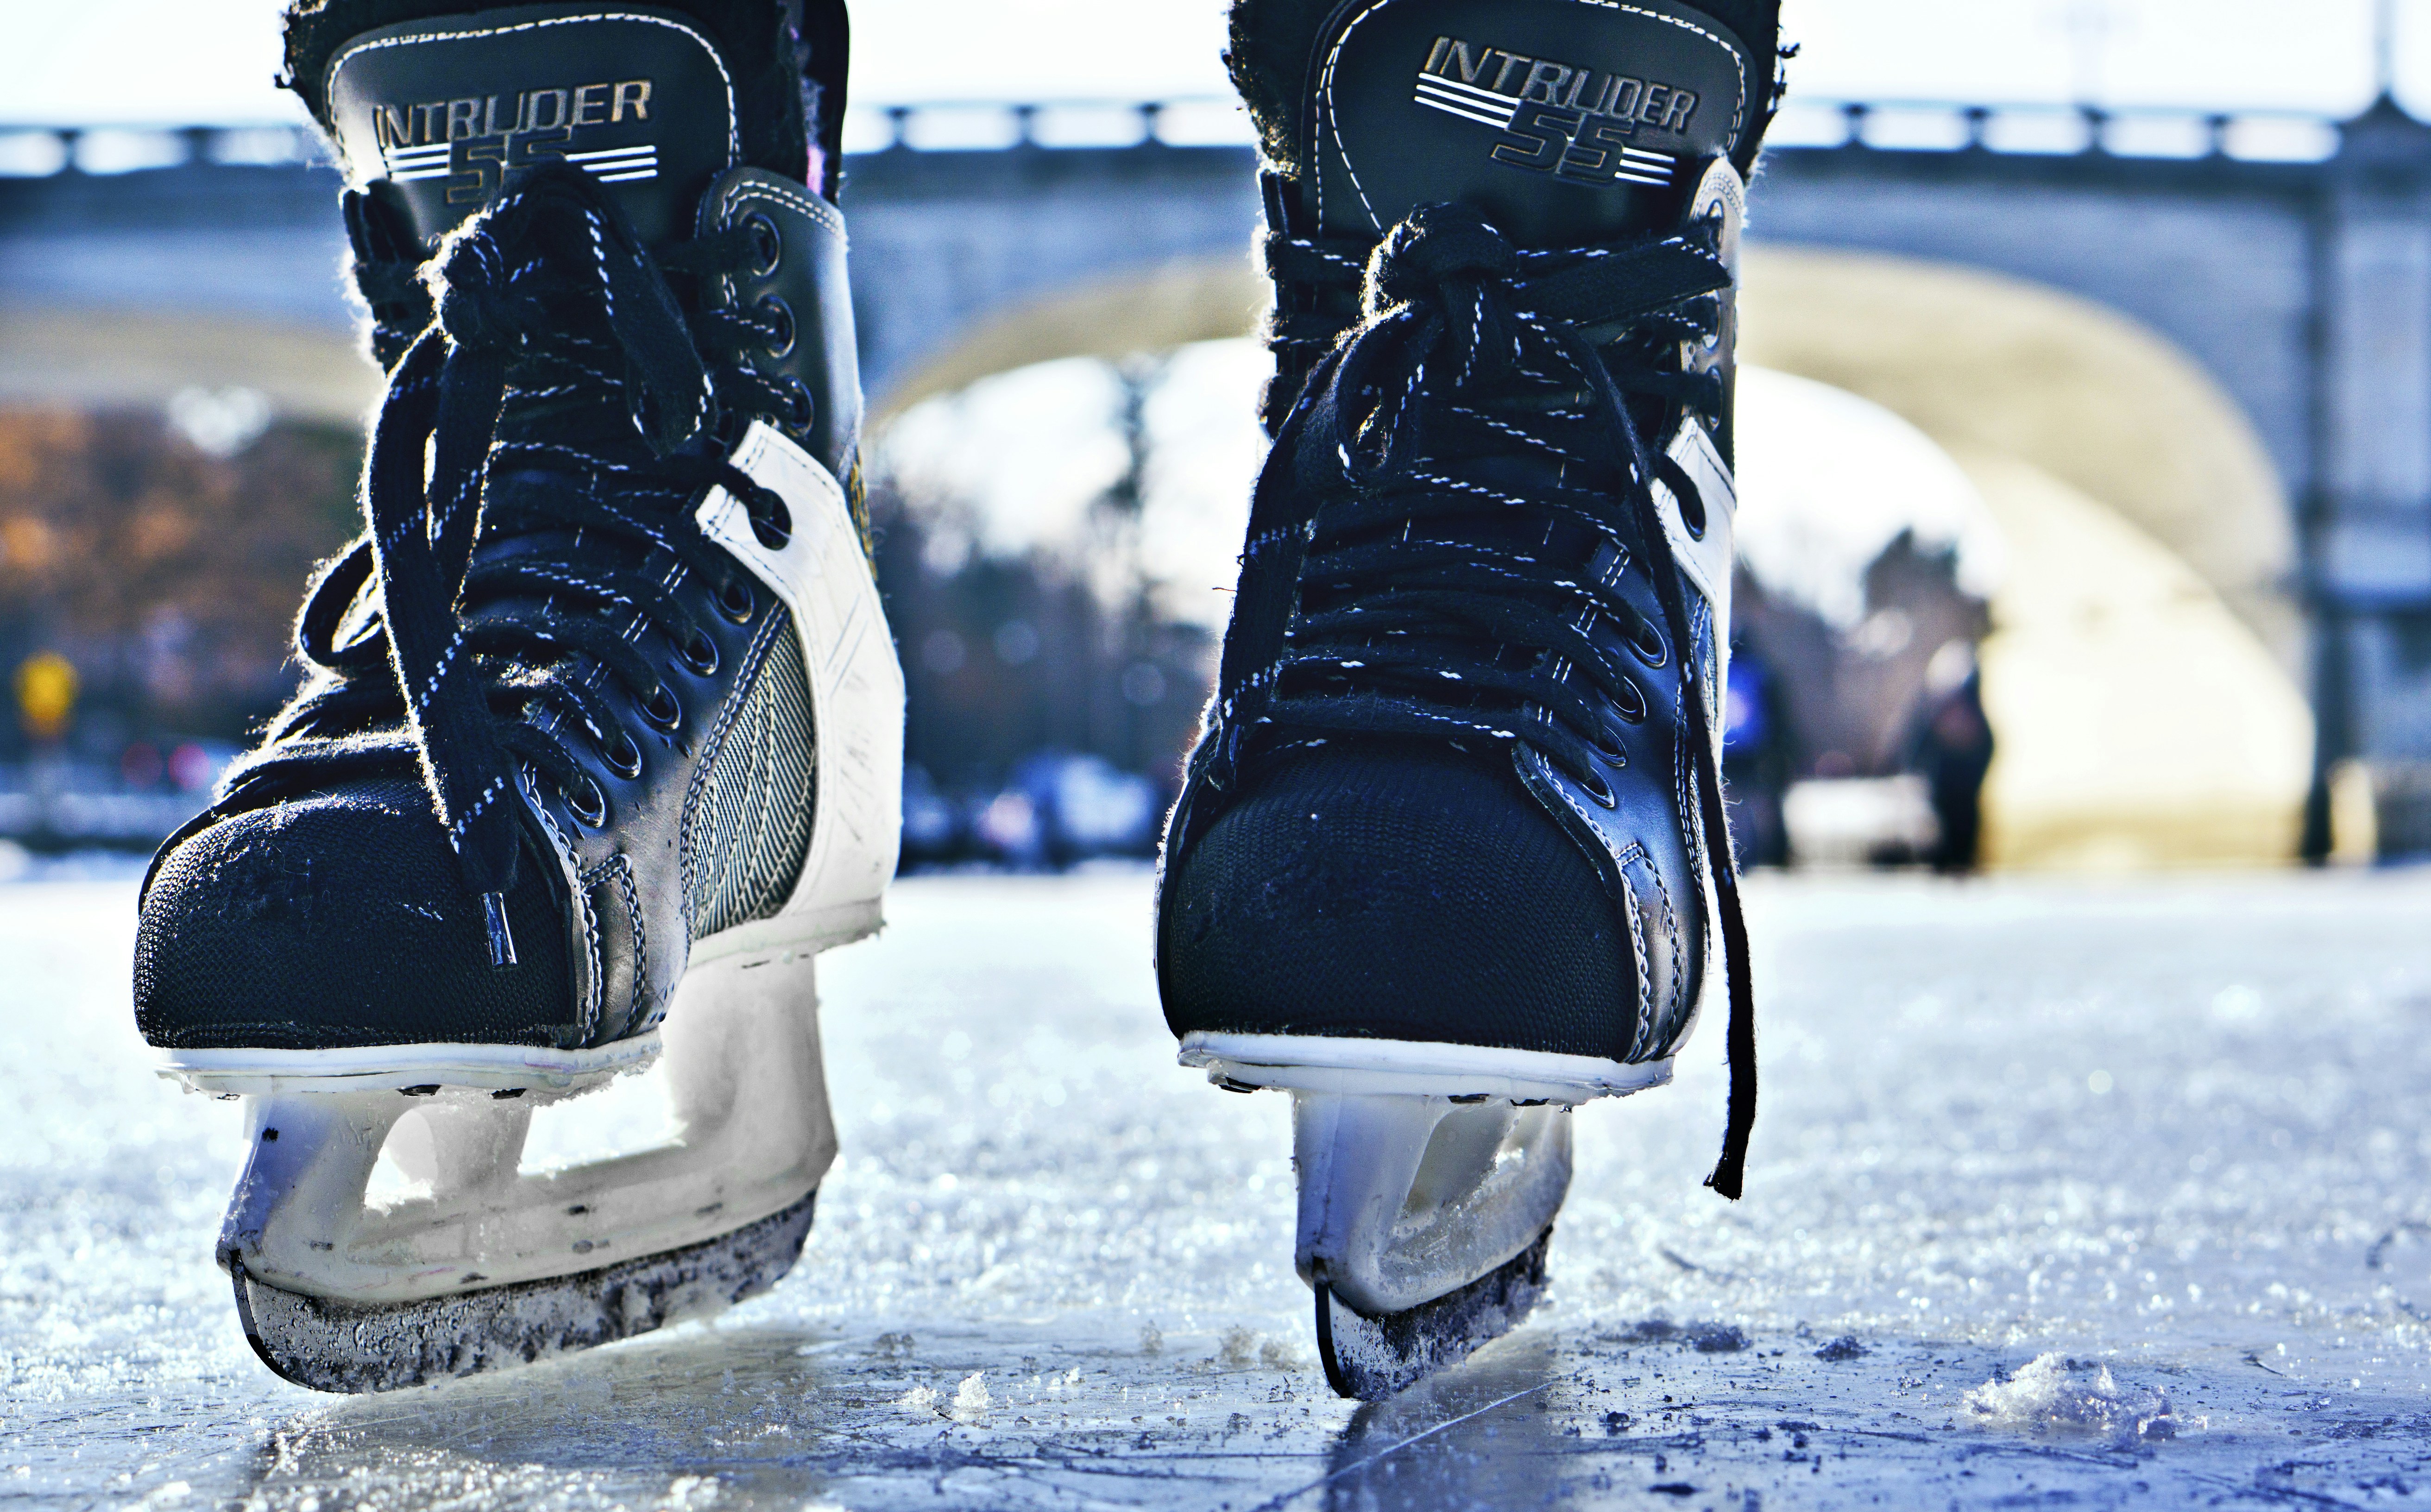 great photo recipe,how to photograph close-up photo of black-and-gray intruder ice skates on frozen body of water